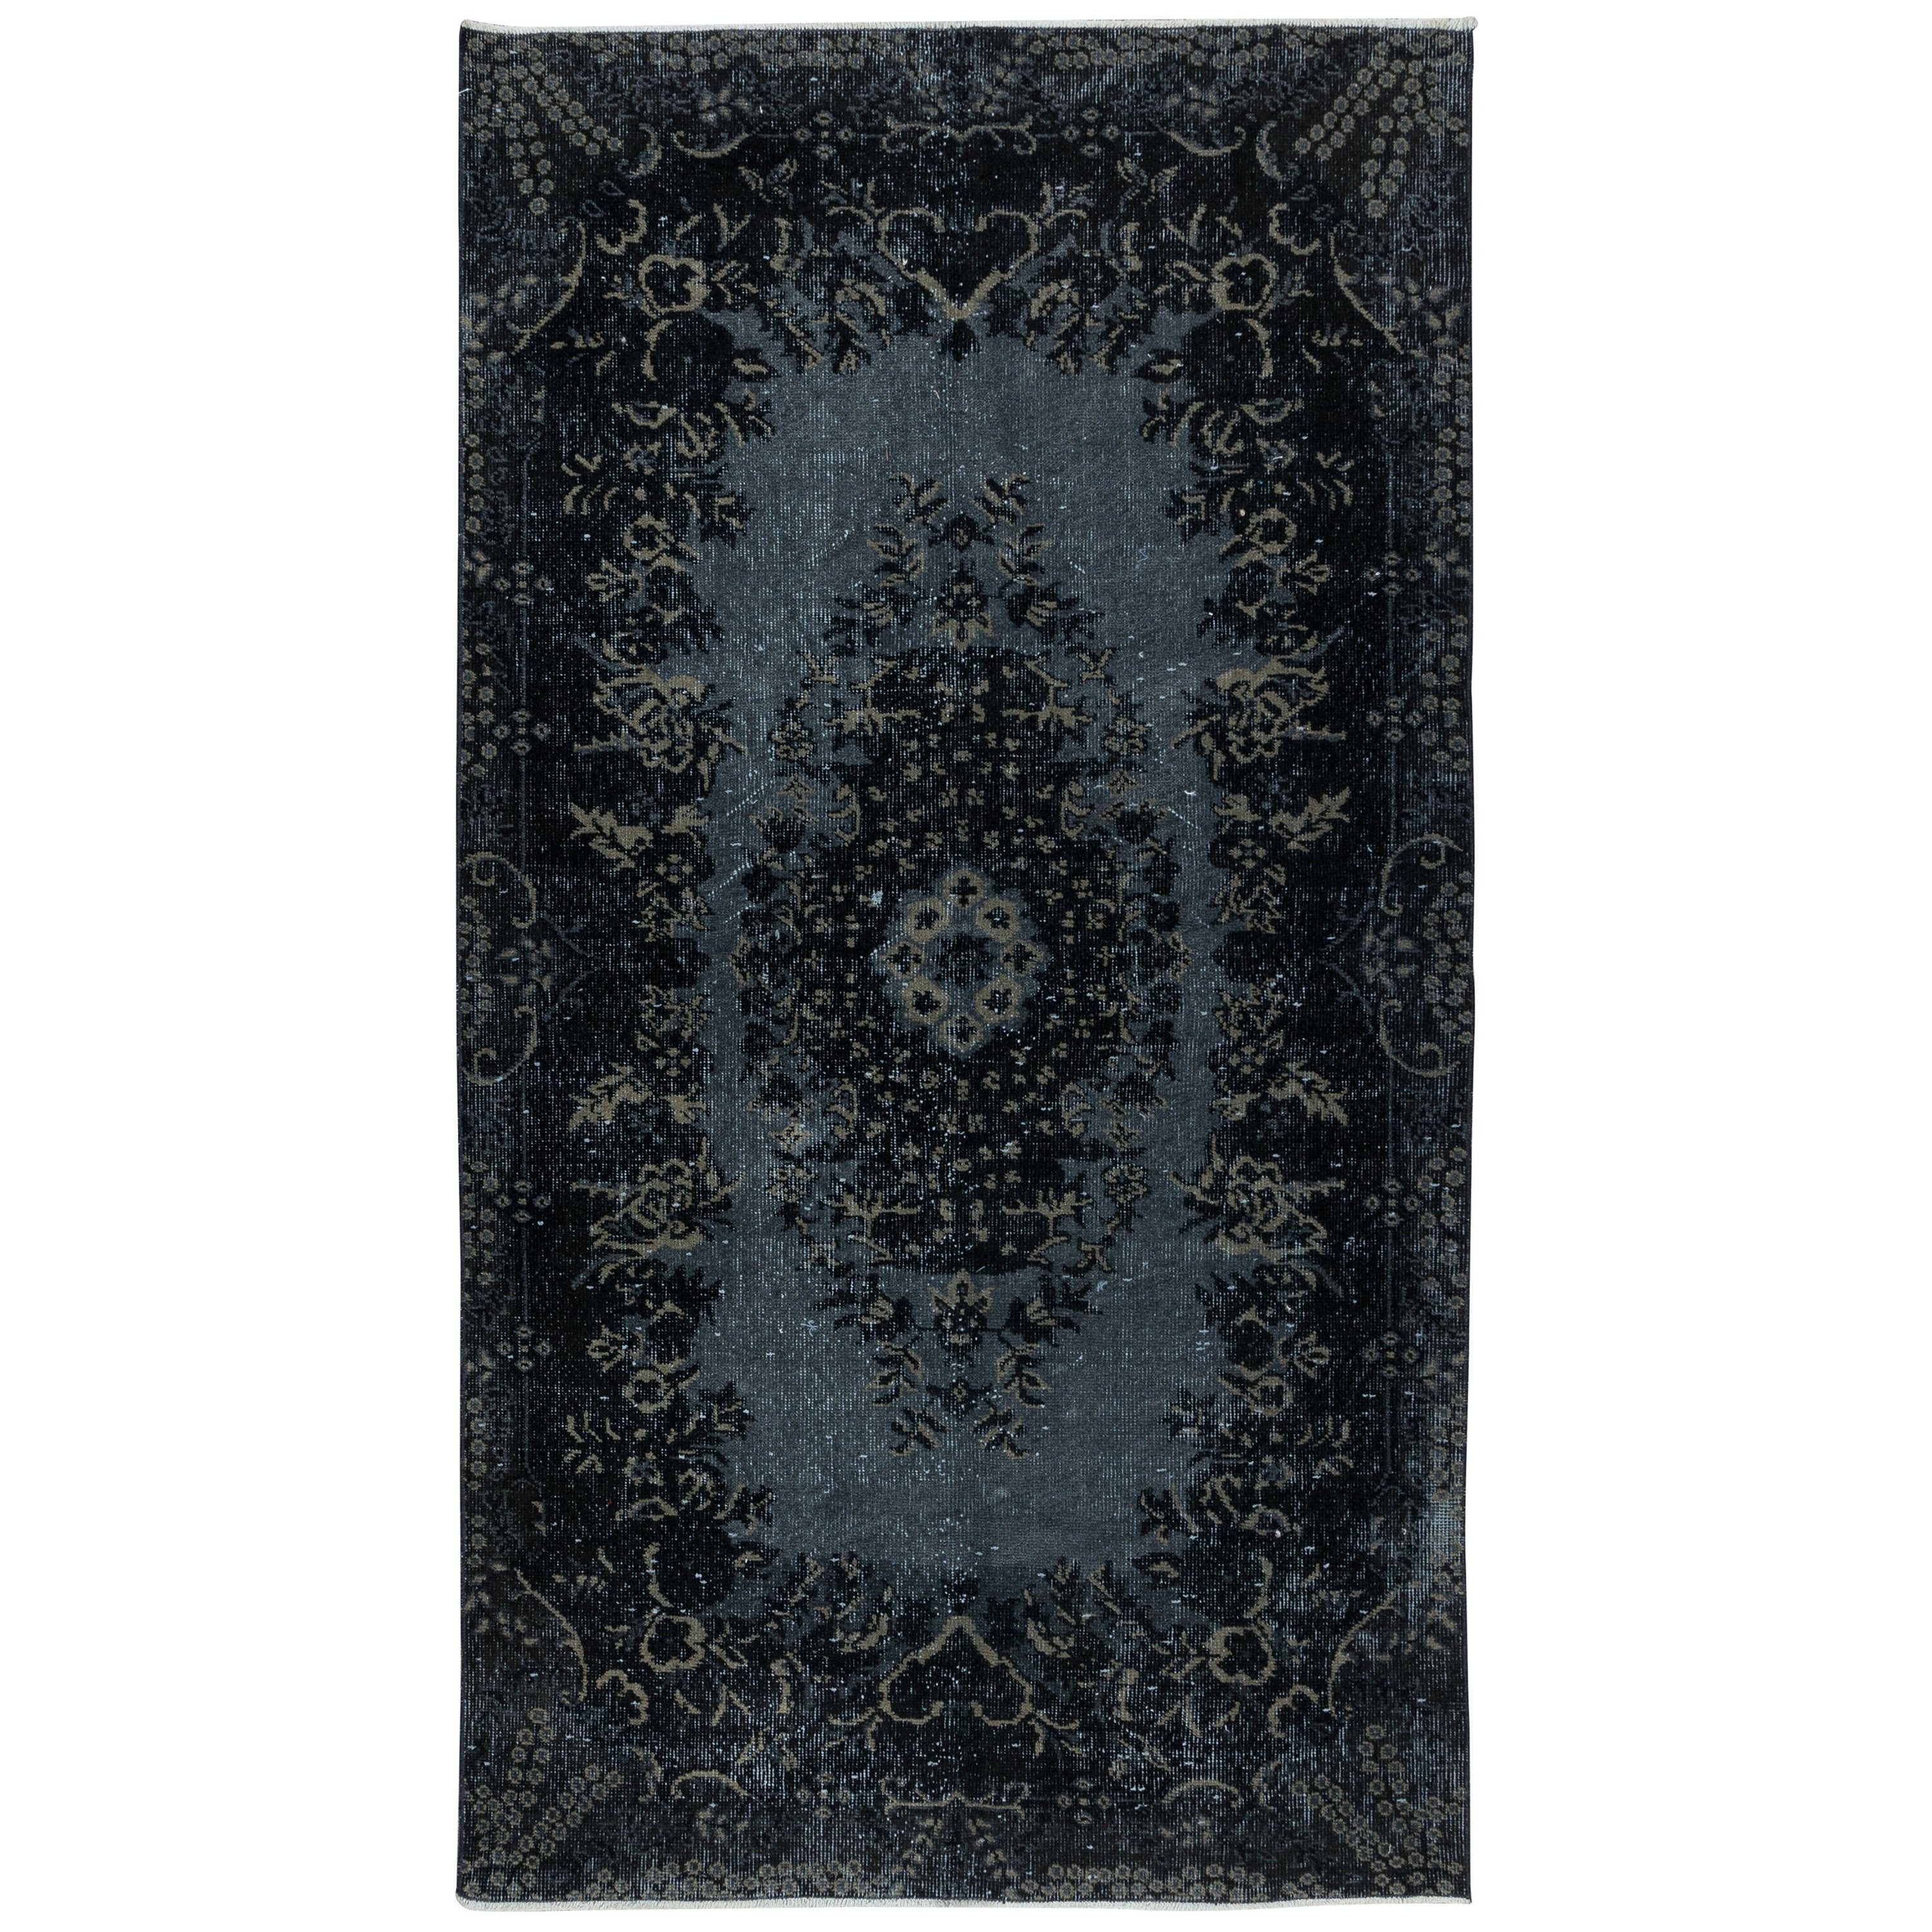 4x7 Ft Modern Handmade Turkish Accent Rug in Black, Gray & Beige with Medallion For Sale